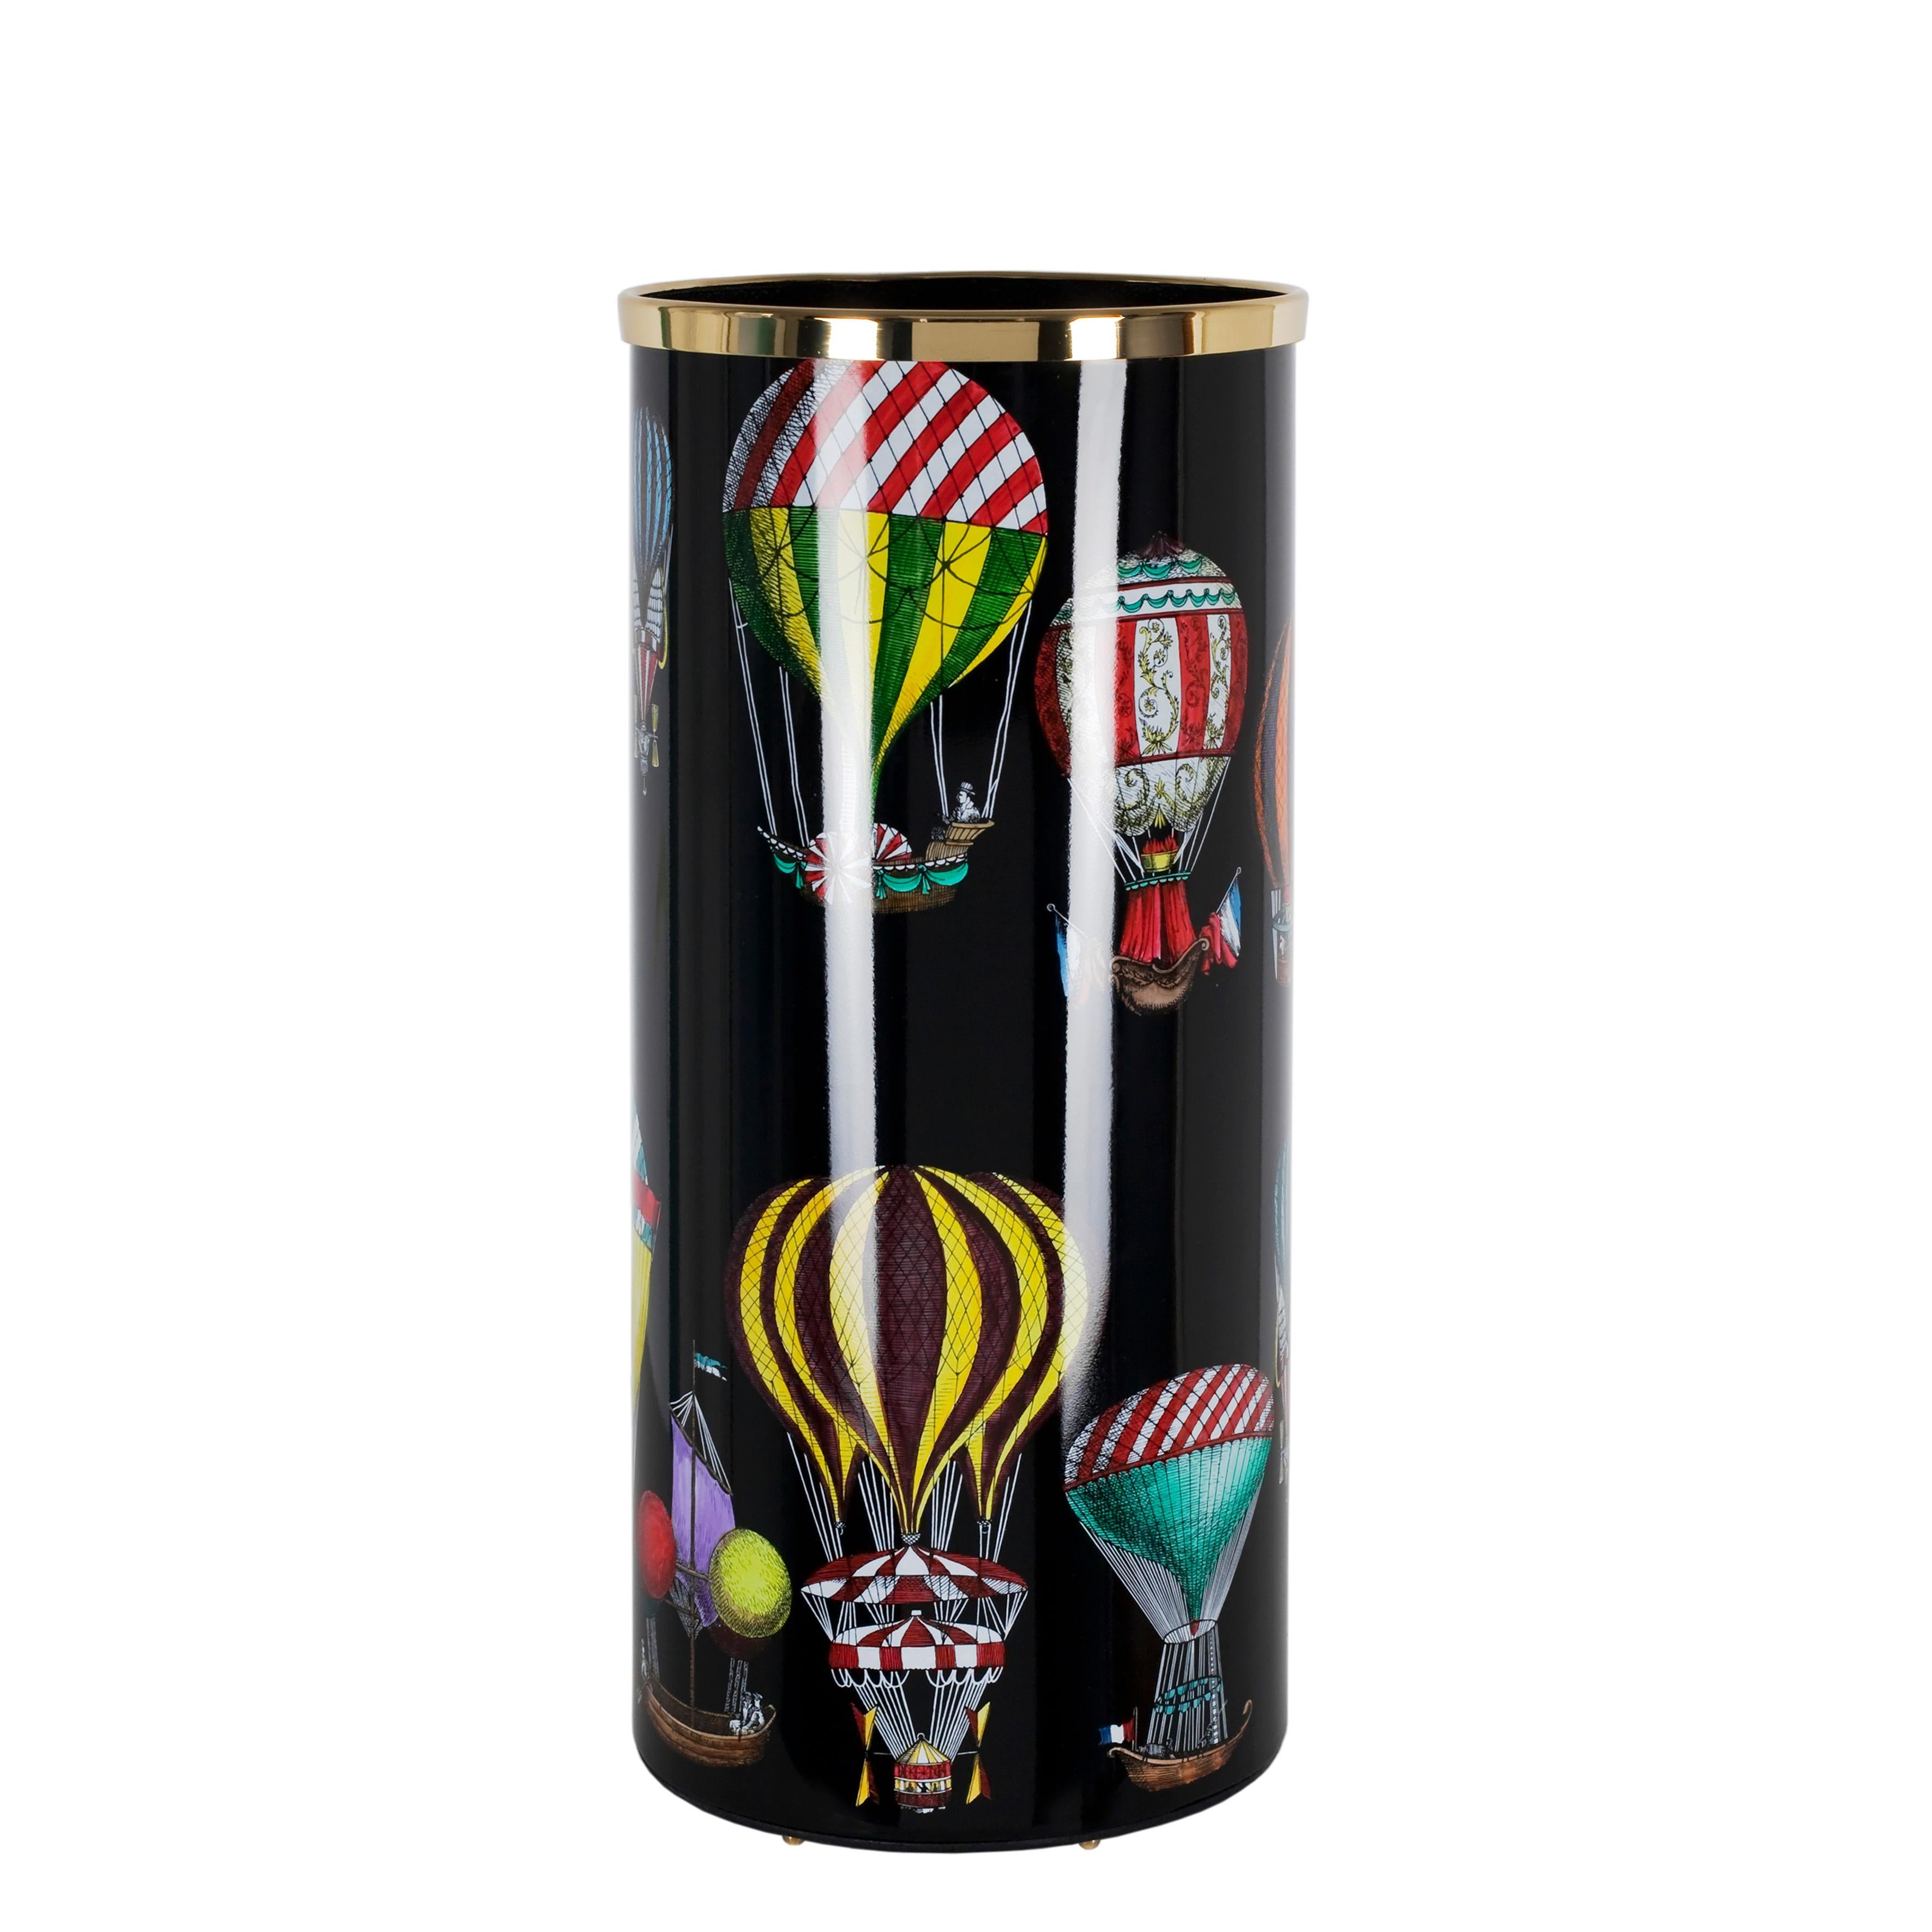 Like all Fornasetti accessories, the umbrella stand is handcrafted using original artisan techniques. This piece is silk-screened by hand, painted by hand and covered with a smooth lacquer.

The shape is still the same designed by Piero Fornasetti